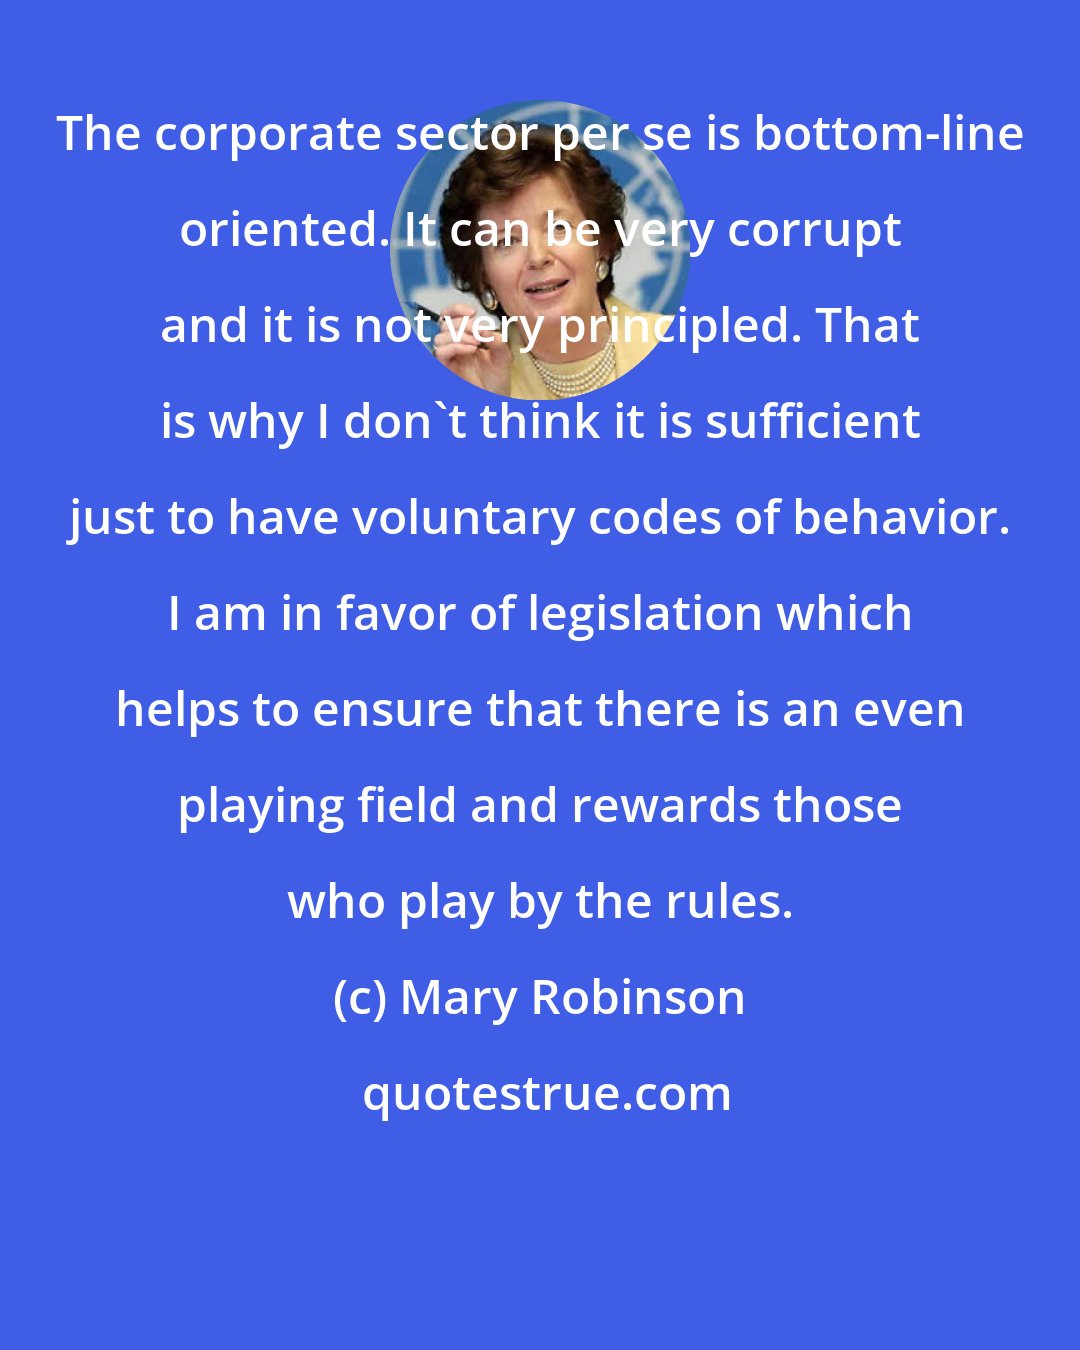 Mary Robinson: The corporate sector per se is bottom-line oriented. It can be very corrupt and it is not very principled. That is why I don't think it is sufficient just to have voluntary codes of behavior. I am in favor of legislation which helps to ensure that there is an even playing field and rewards those who play by the rules.